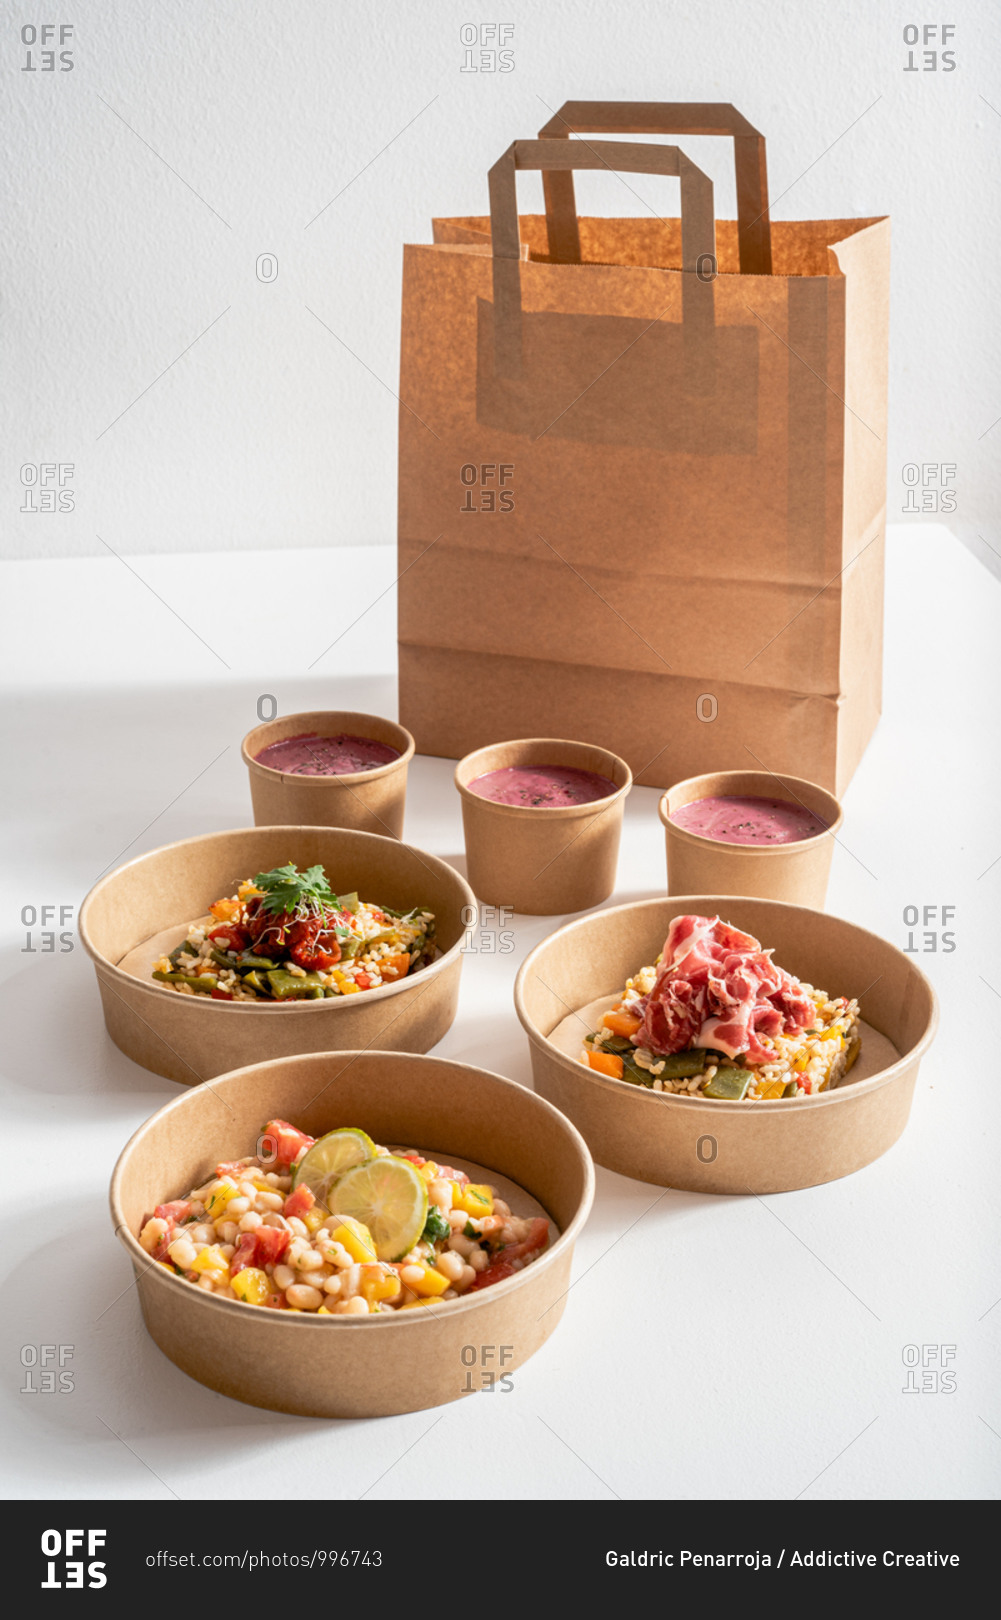 From above Molí de Pals vegetable rice, iberico ham and Shrimp Ceviche in carton bowls placed on paper bag on table with delicious beetroot cream